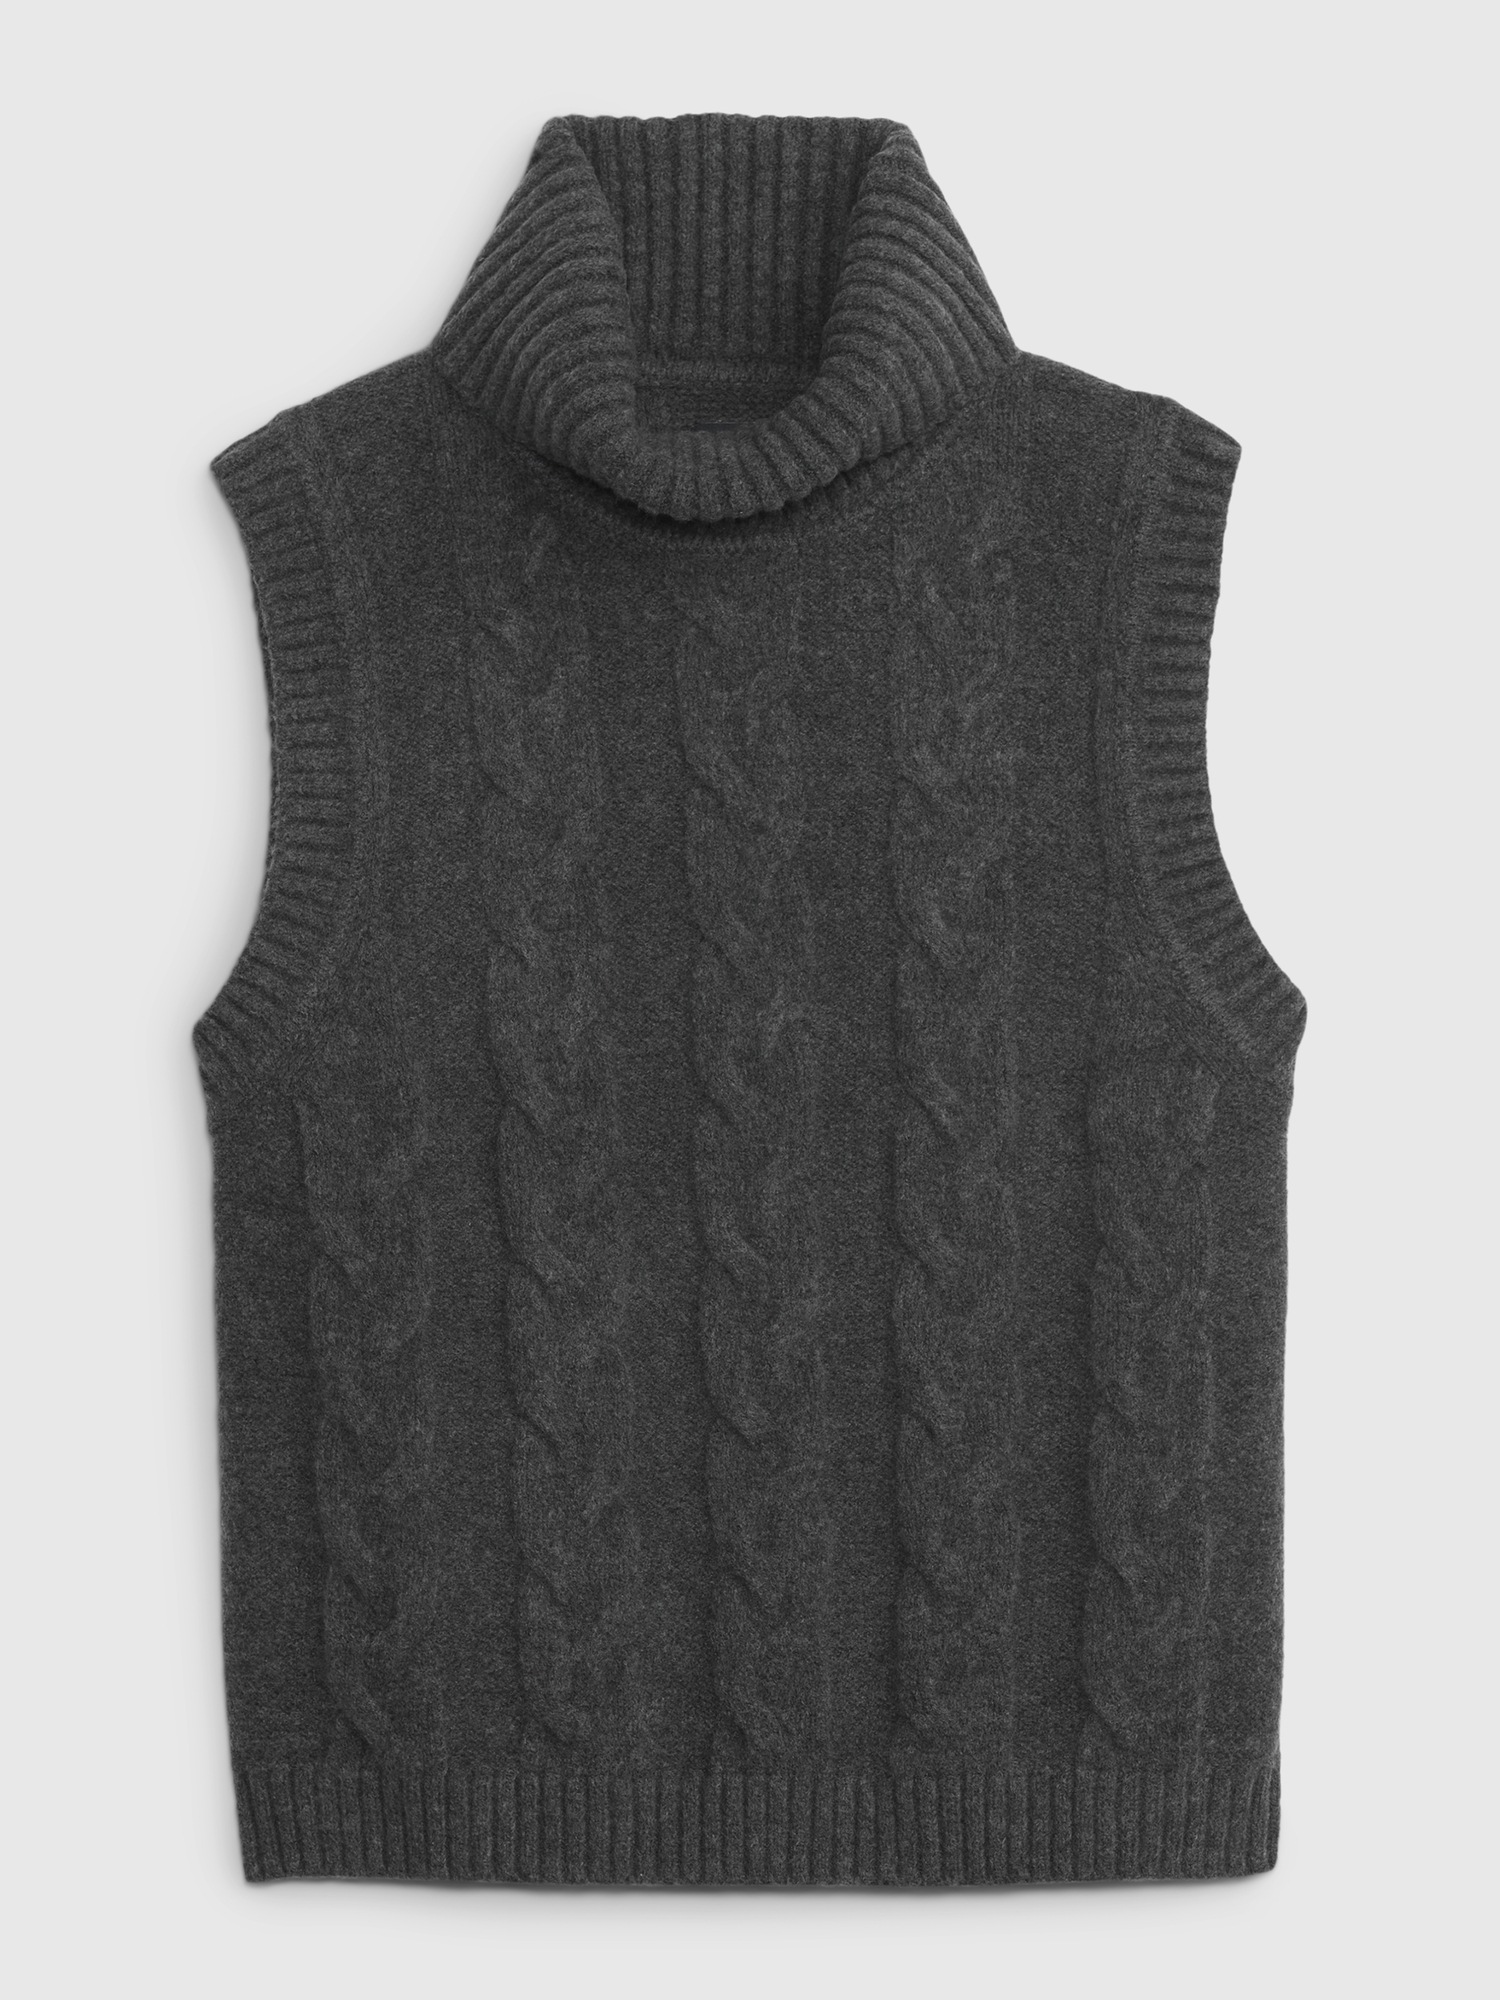 Scoop Neck Soft Cable Knit Tank Top – meison